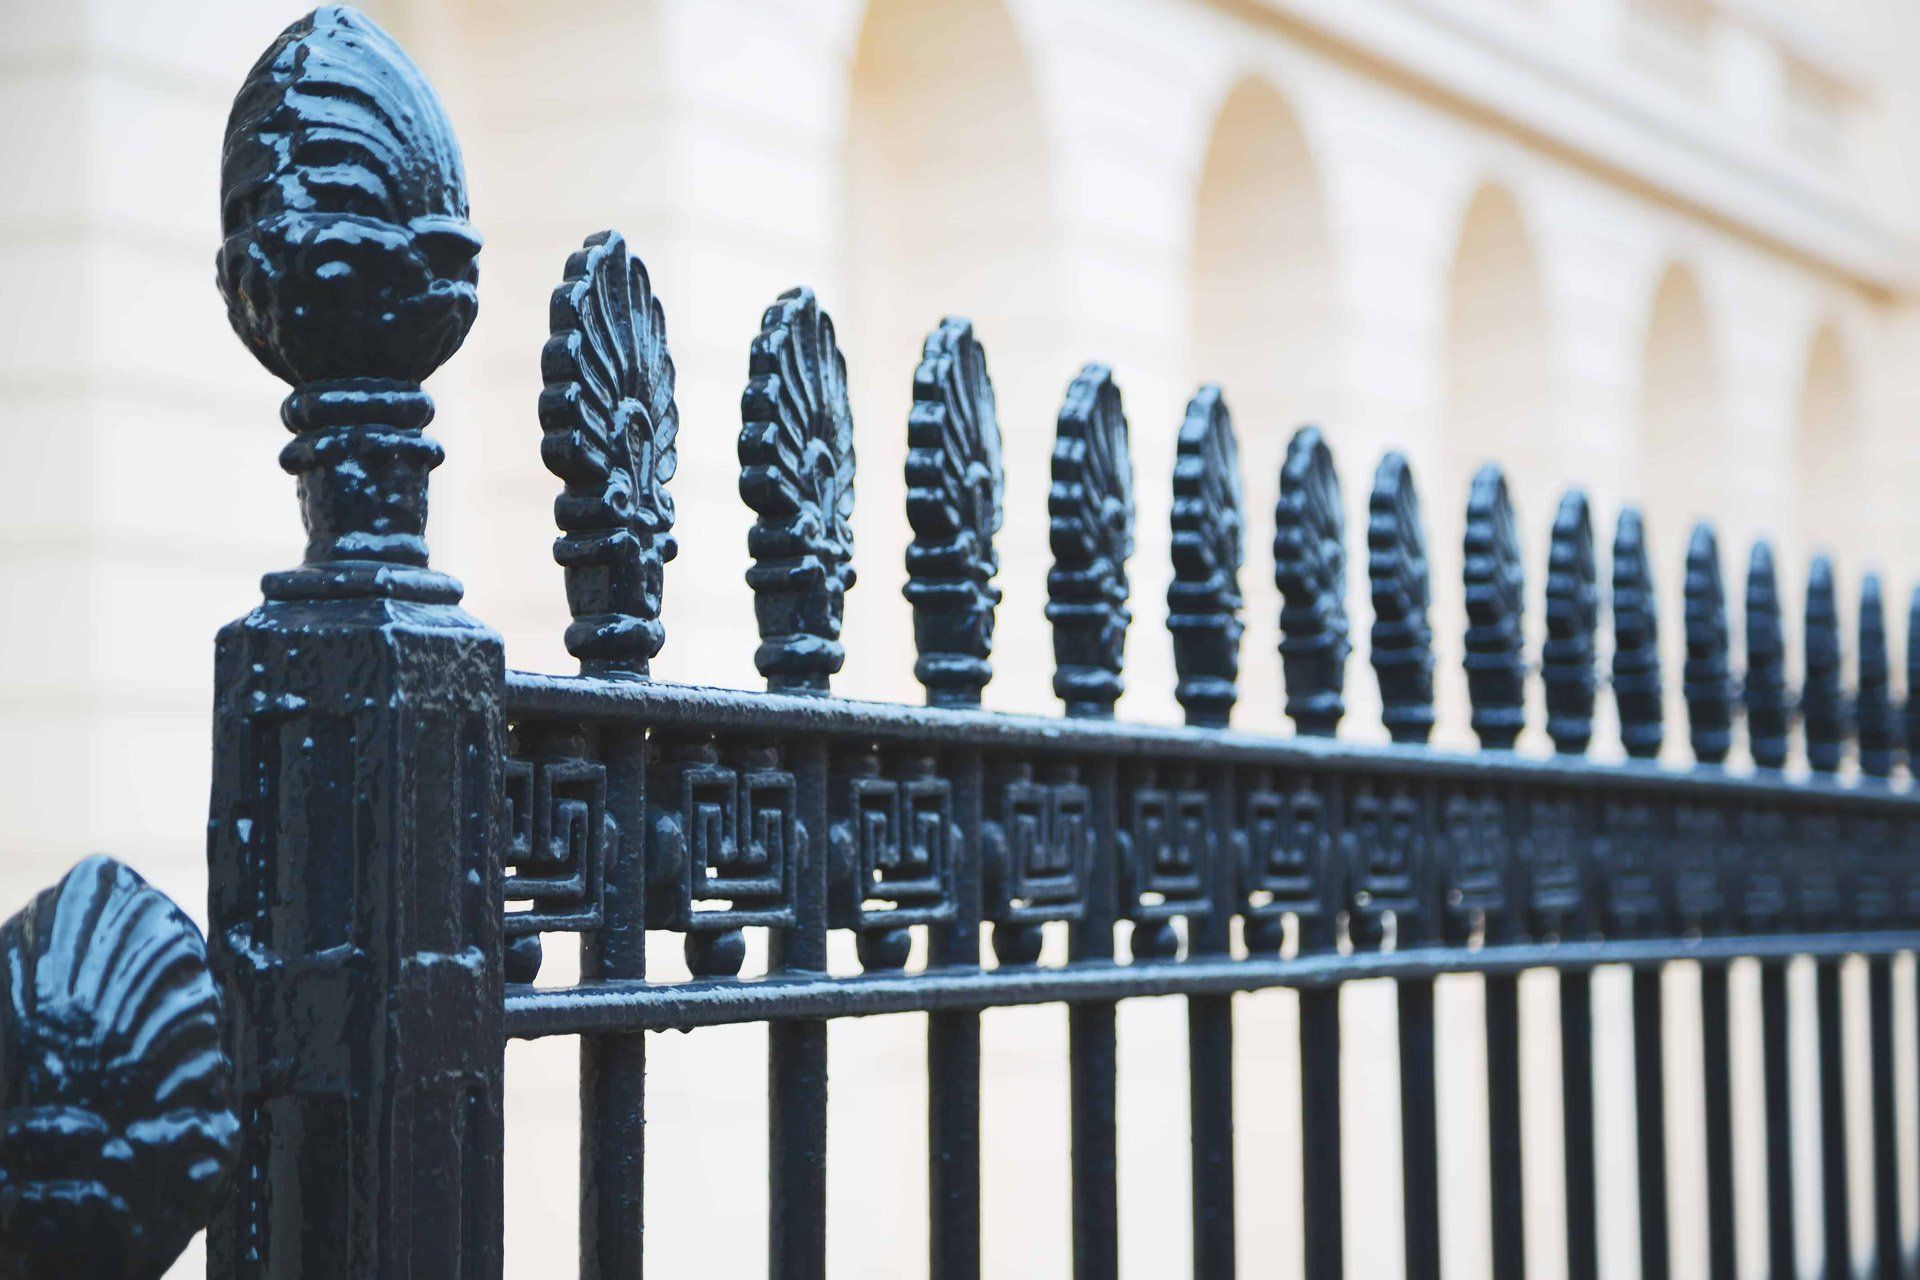 Wrought iron fence is a strong fencing solution